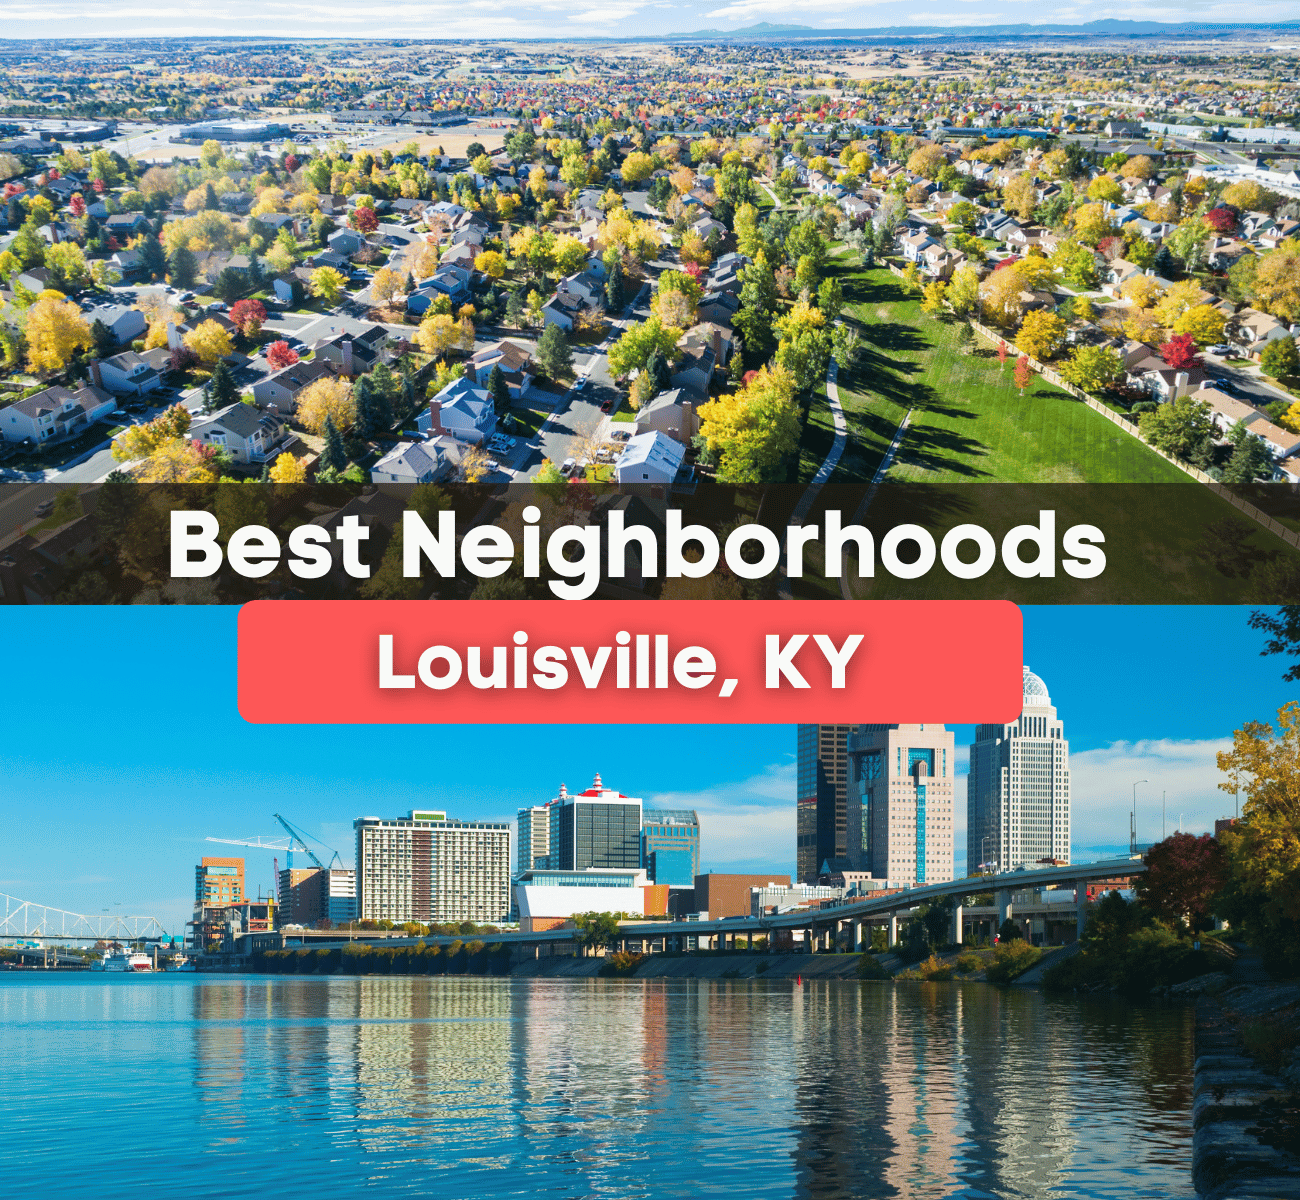 Ashland, KY metro named third best affordable place to live